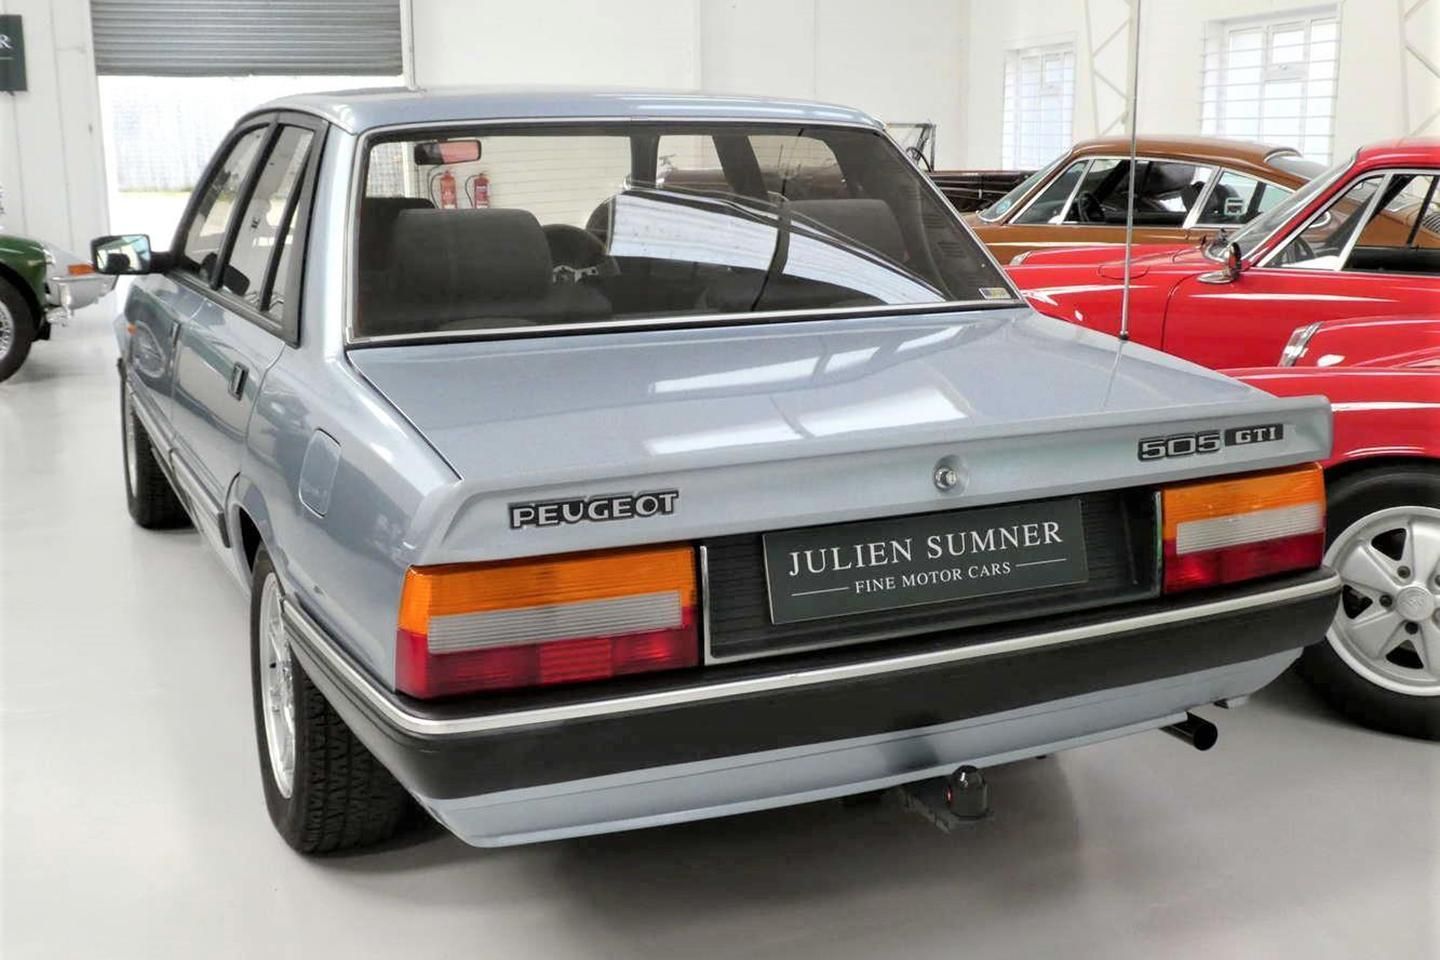 1991 Peugeot 505 GRD Brake Estate Goes for a Drive  YouTube